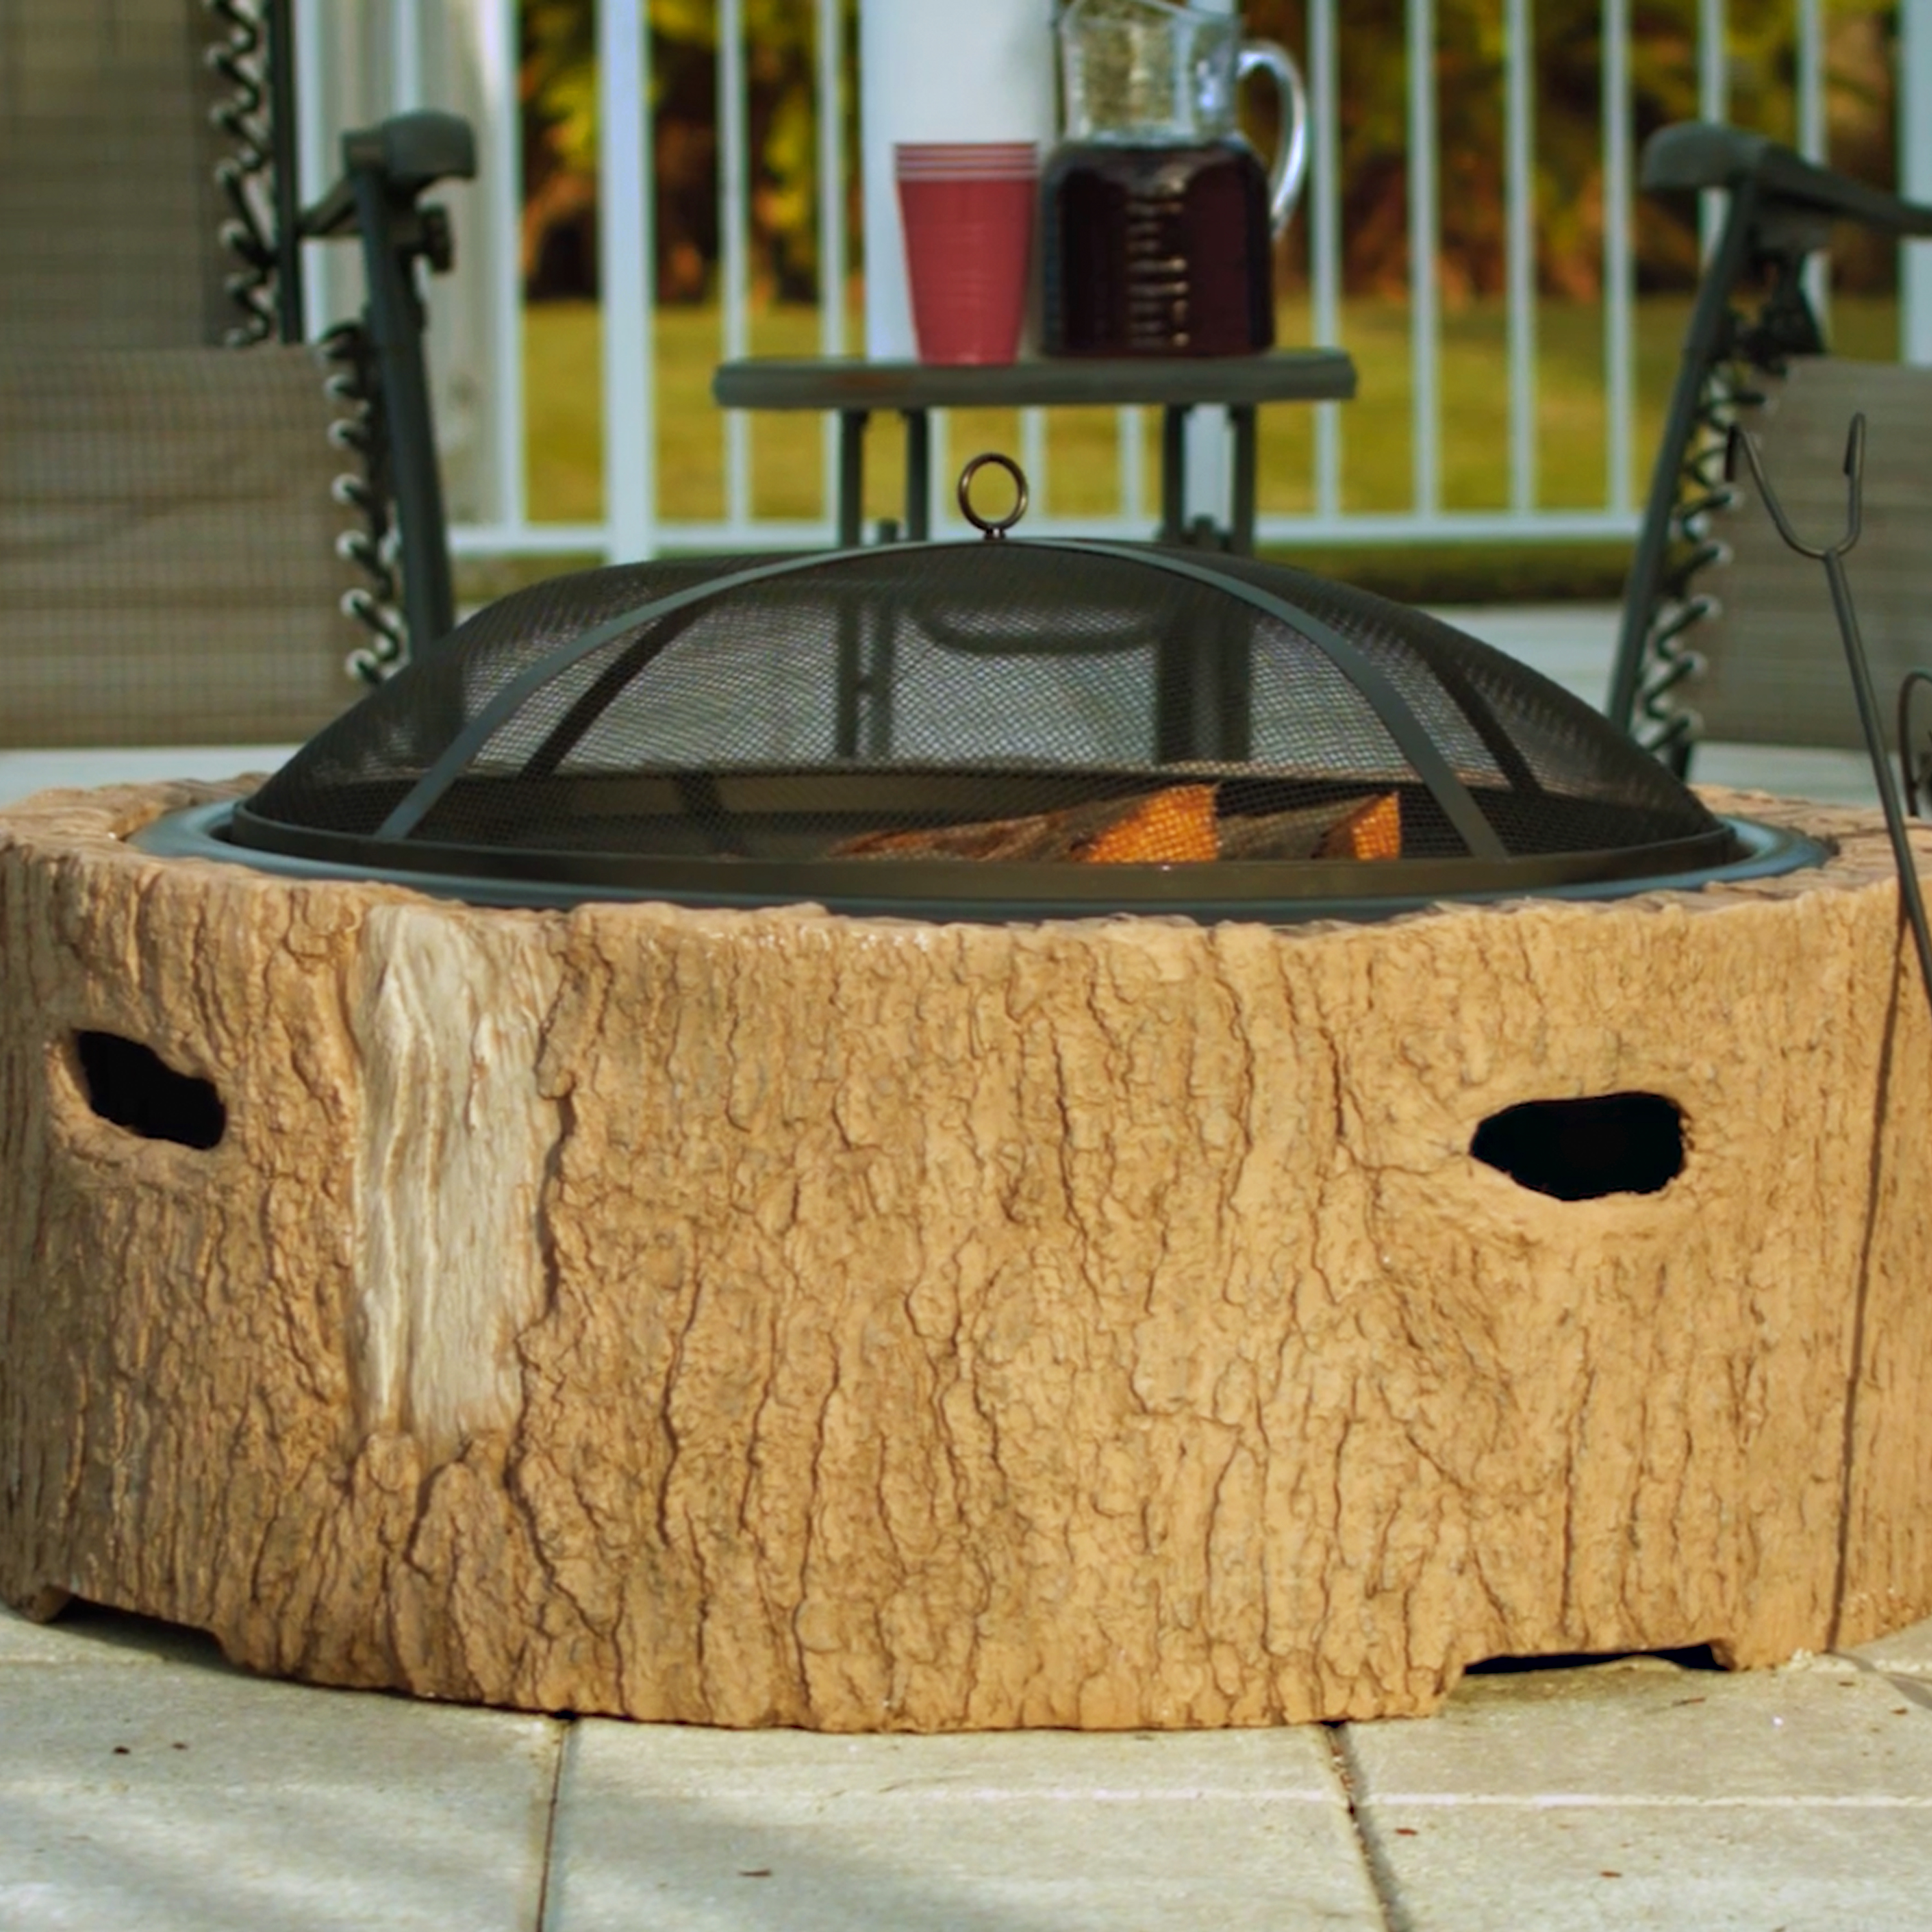 Martha Stewart MTS-FP35-FB 35 in. Cast Stone, Wood Burning Fire Pit with 26 in. Mesh Spark Guard Screen, Log Poker, Faux Bois - image 2 of 5